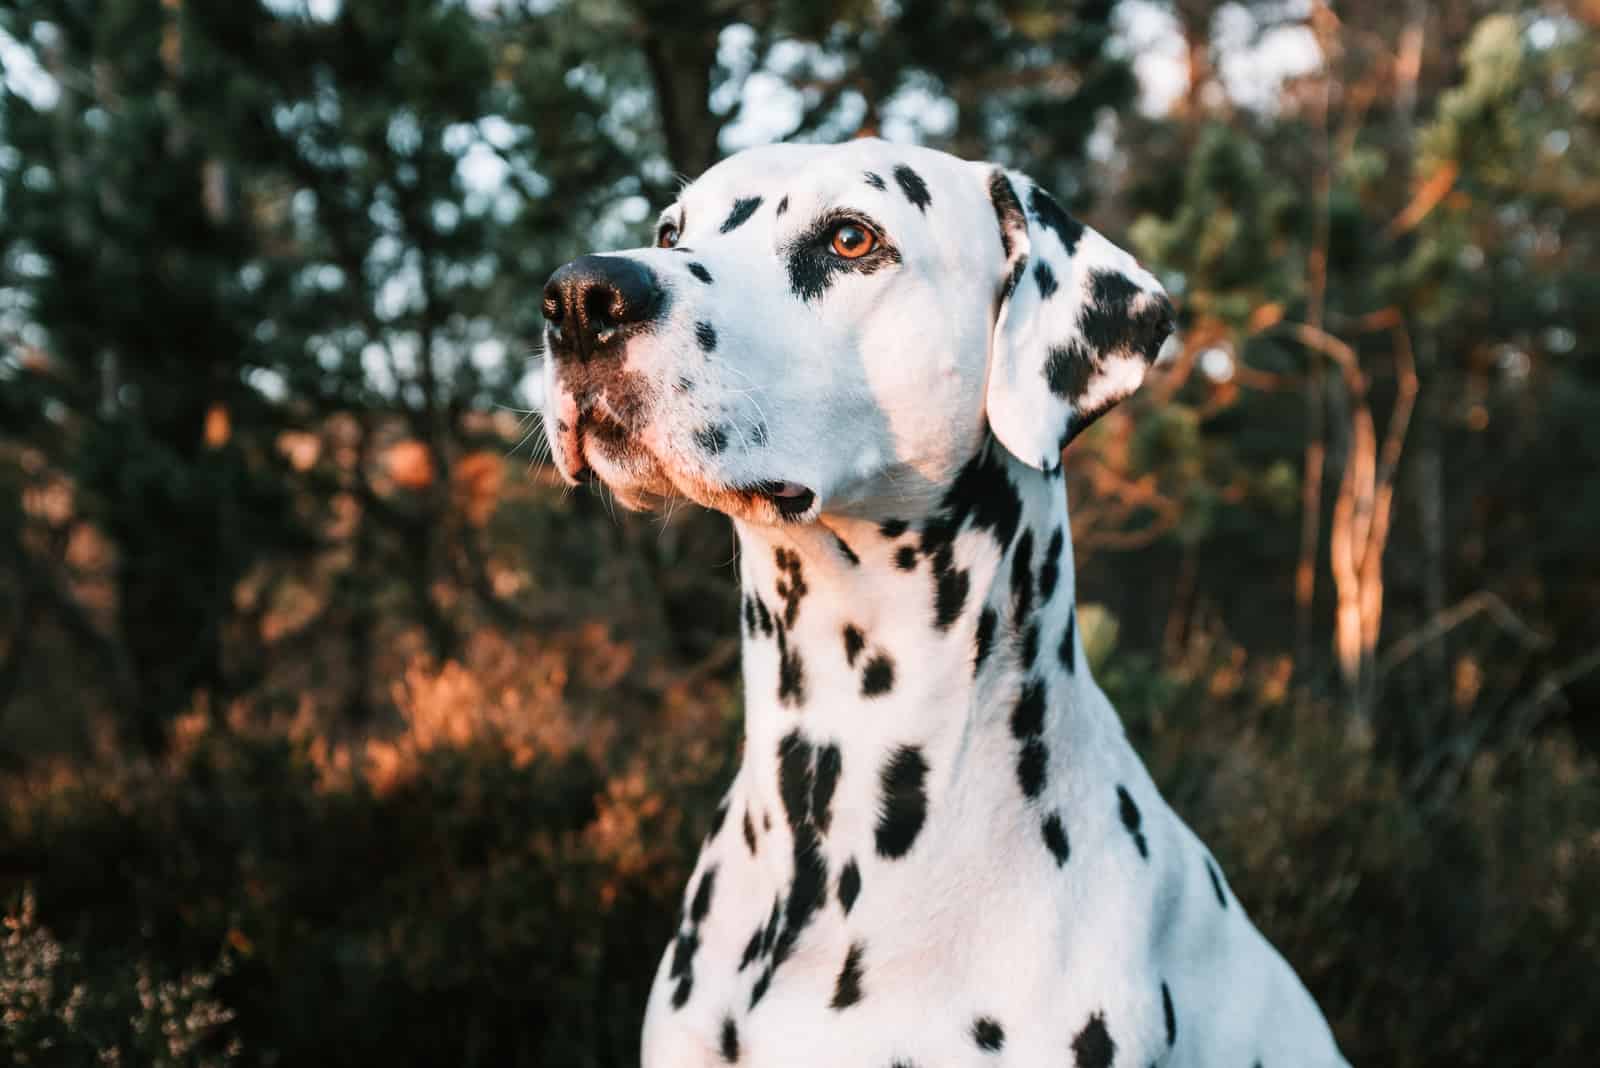 dalmatian dog with black spots standing in forest